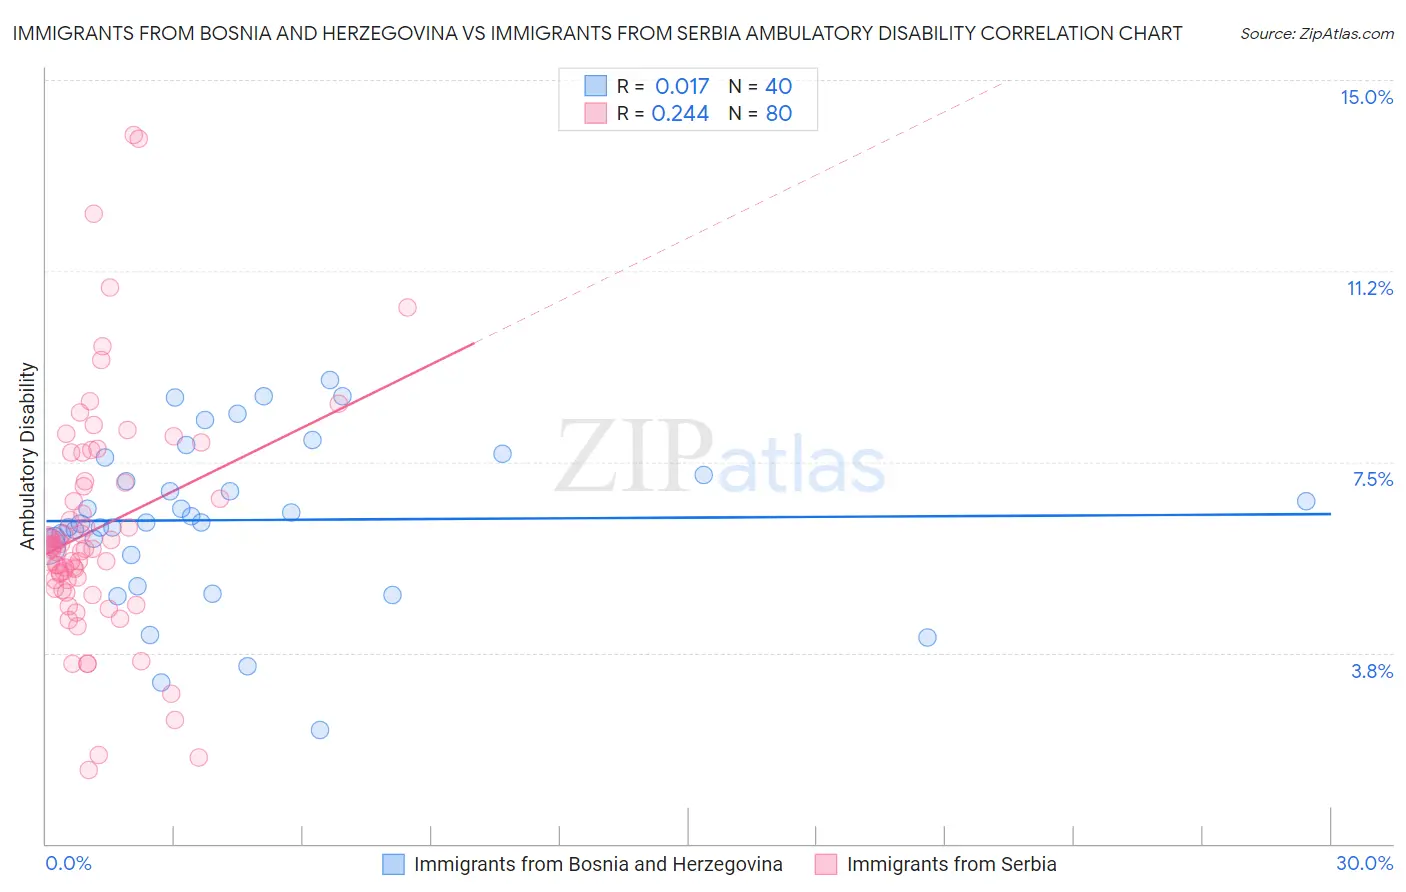 Immigrants from Bosnia and Herzegovina vs Immigrants from Serbia Ambulatory Disability